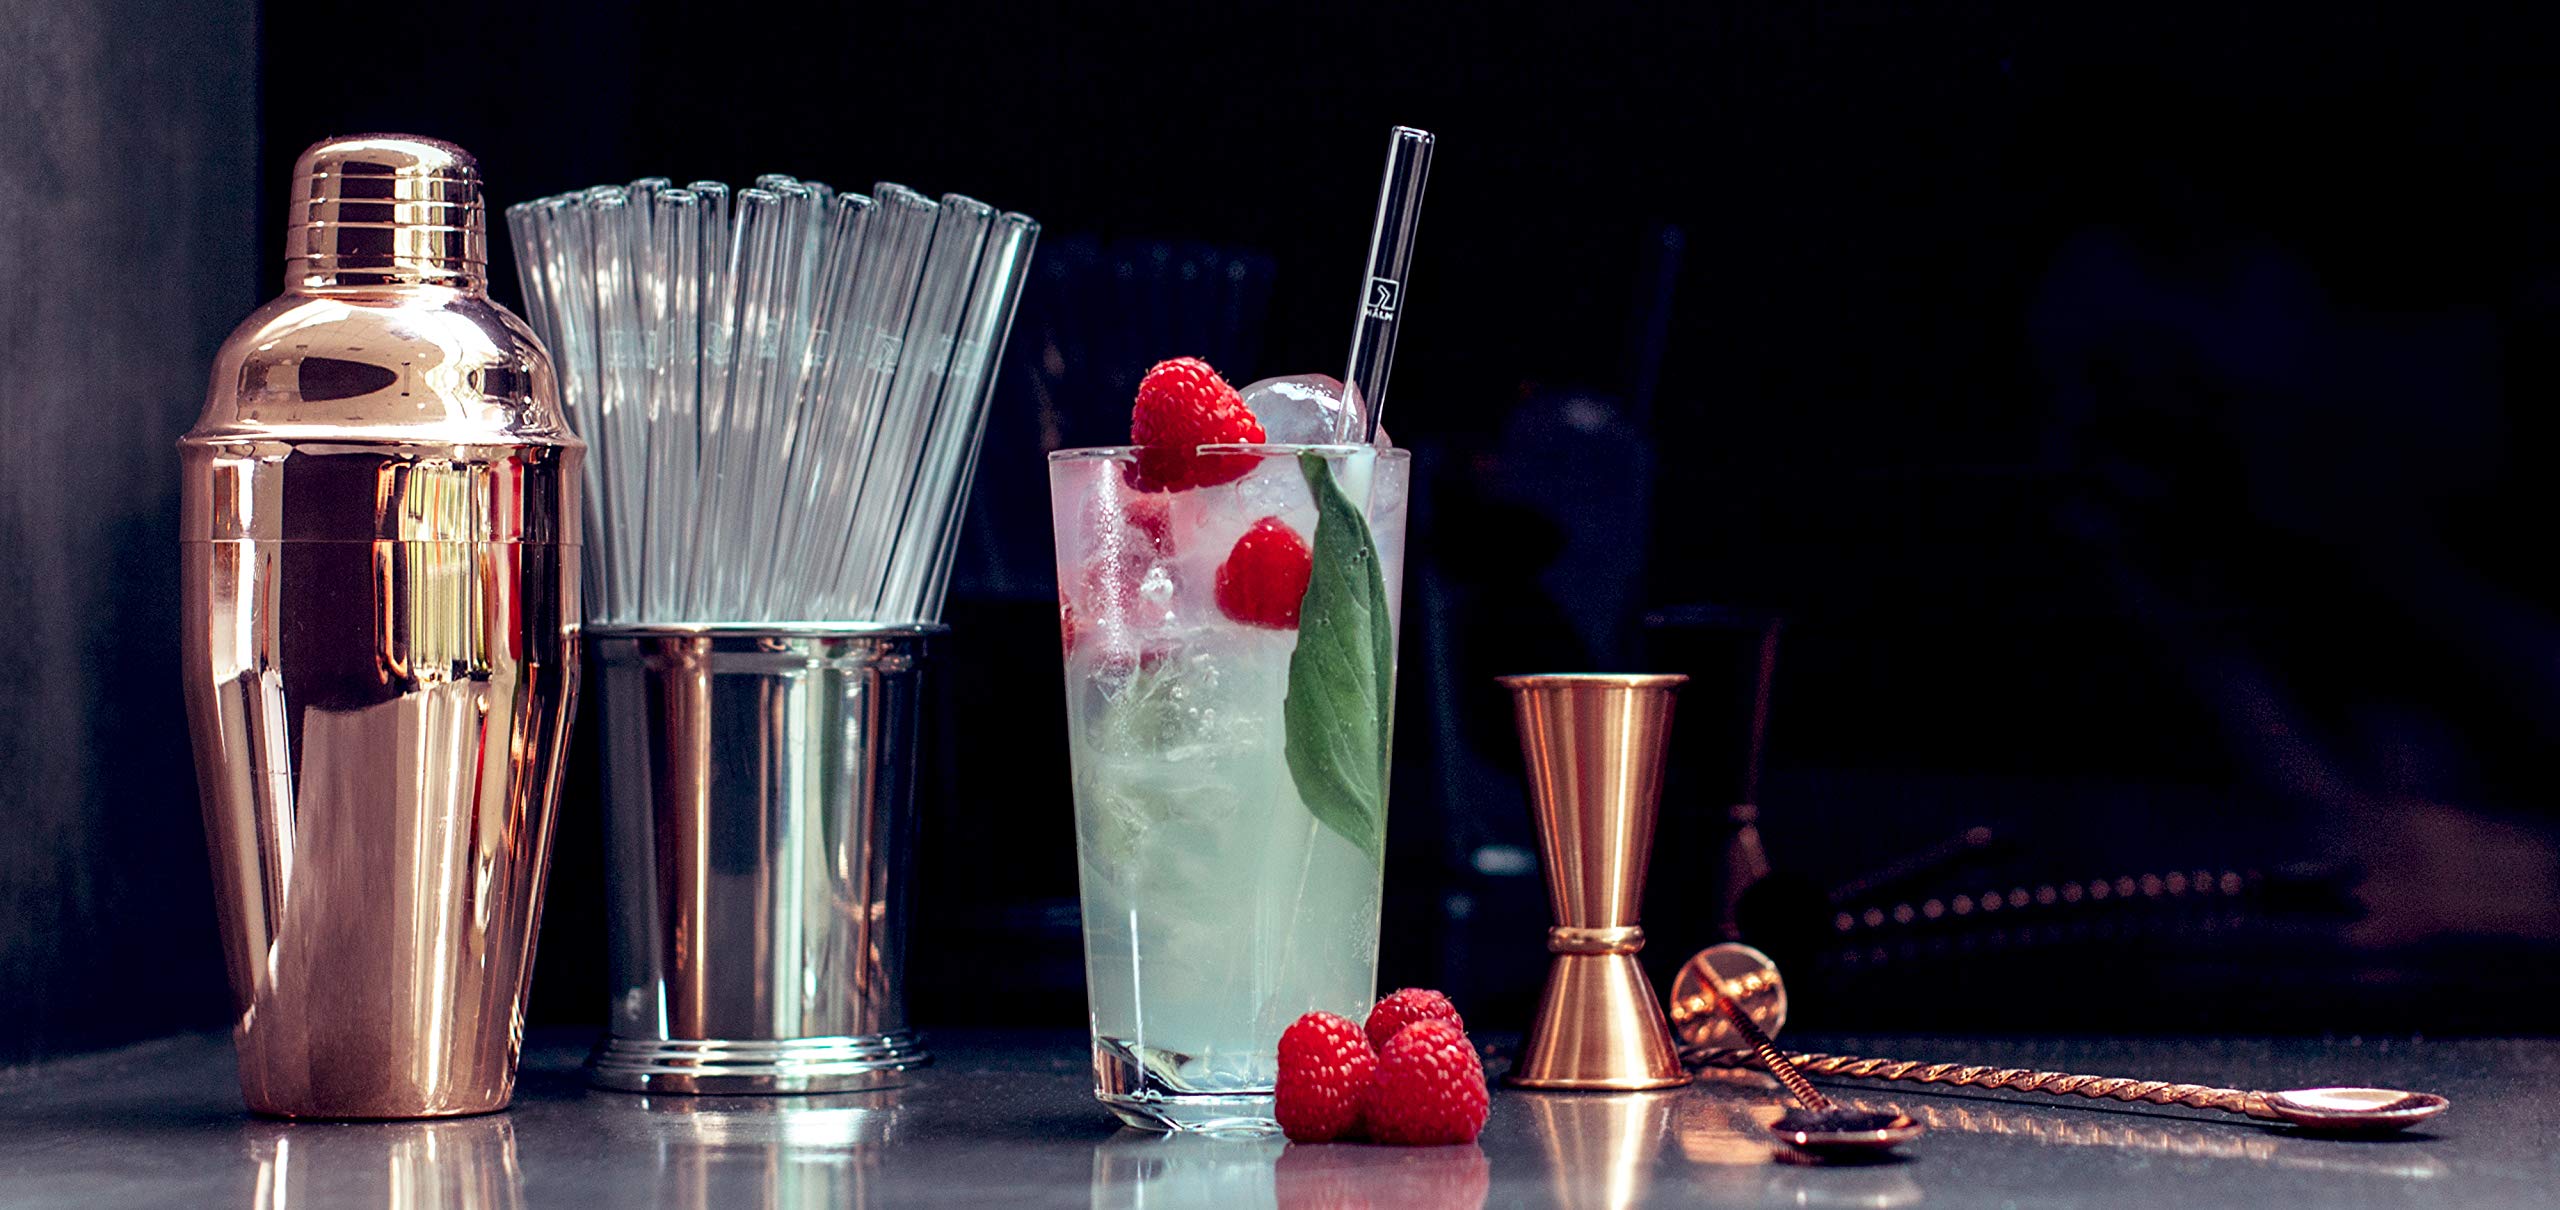 Halm Glass Straws - 6x Reusable 8 inch Drinking Straws clear + Plastic-Free Cleaning Brush - Made in Germany - Dishwasher Safe - Straight - Perfect for Smoothies, Cocktails